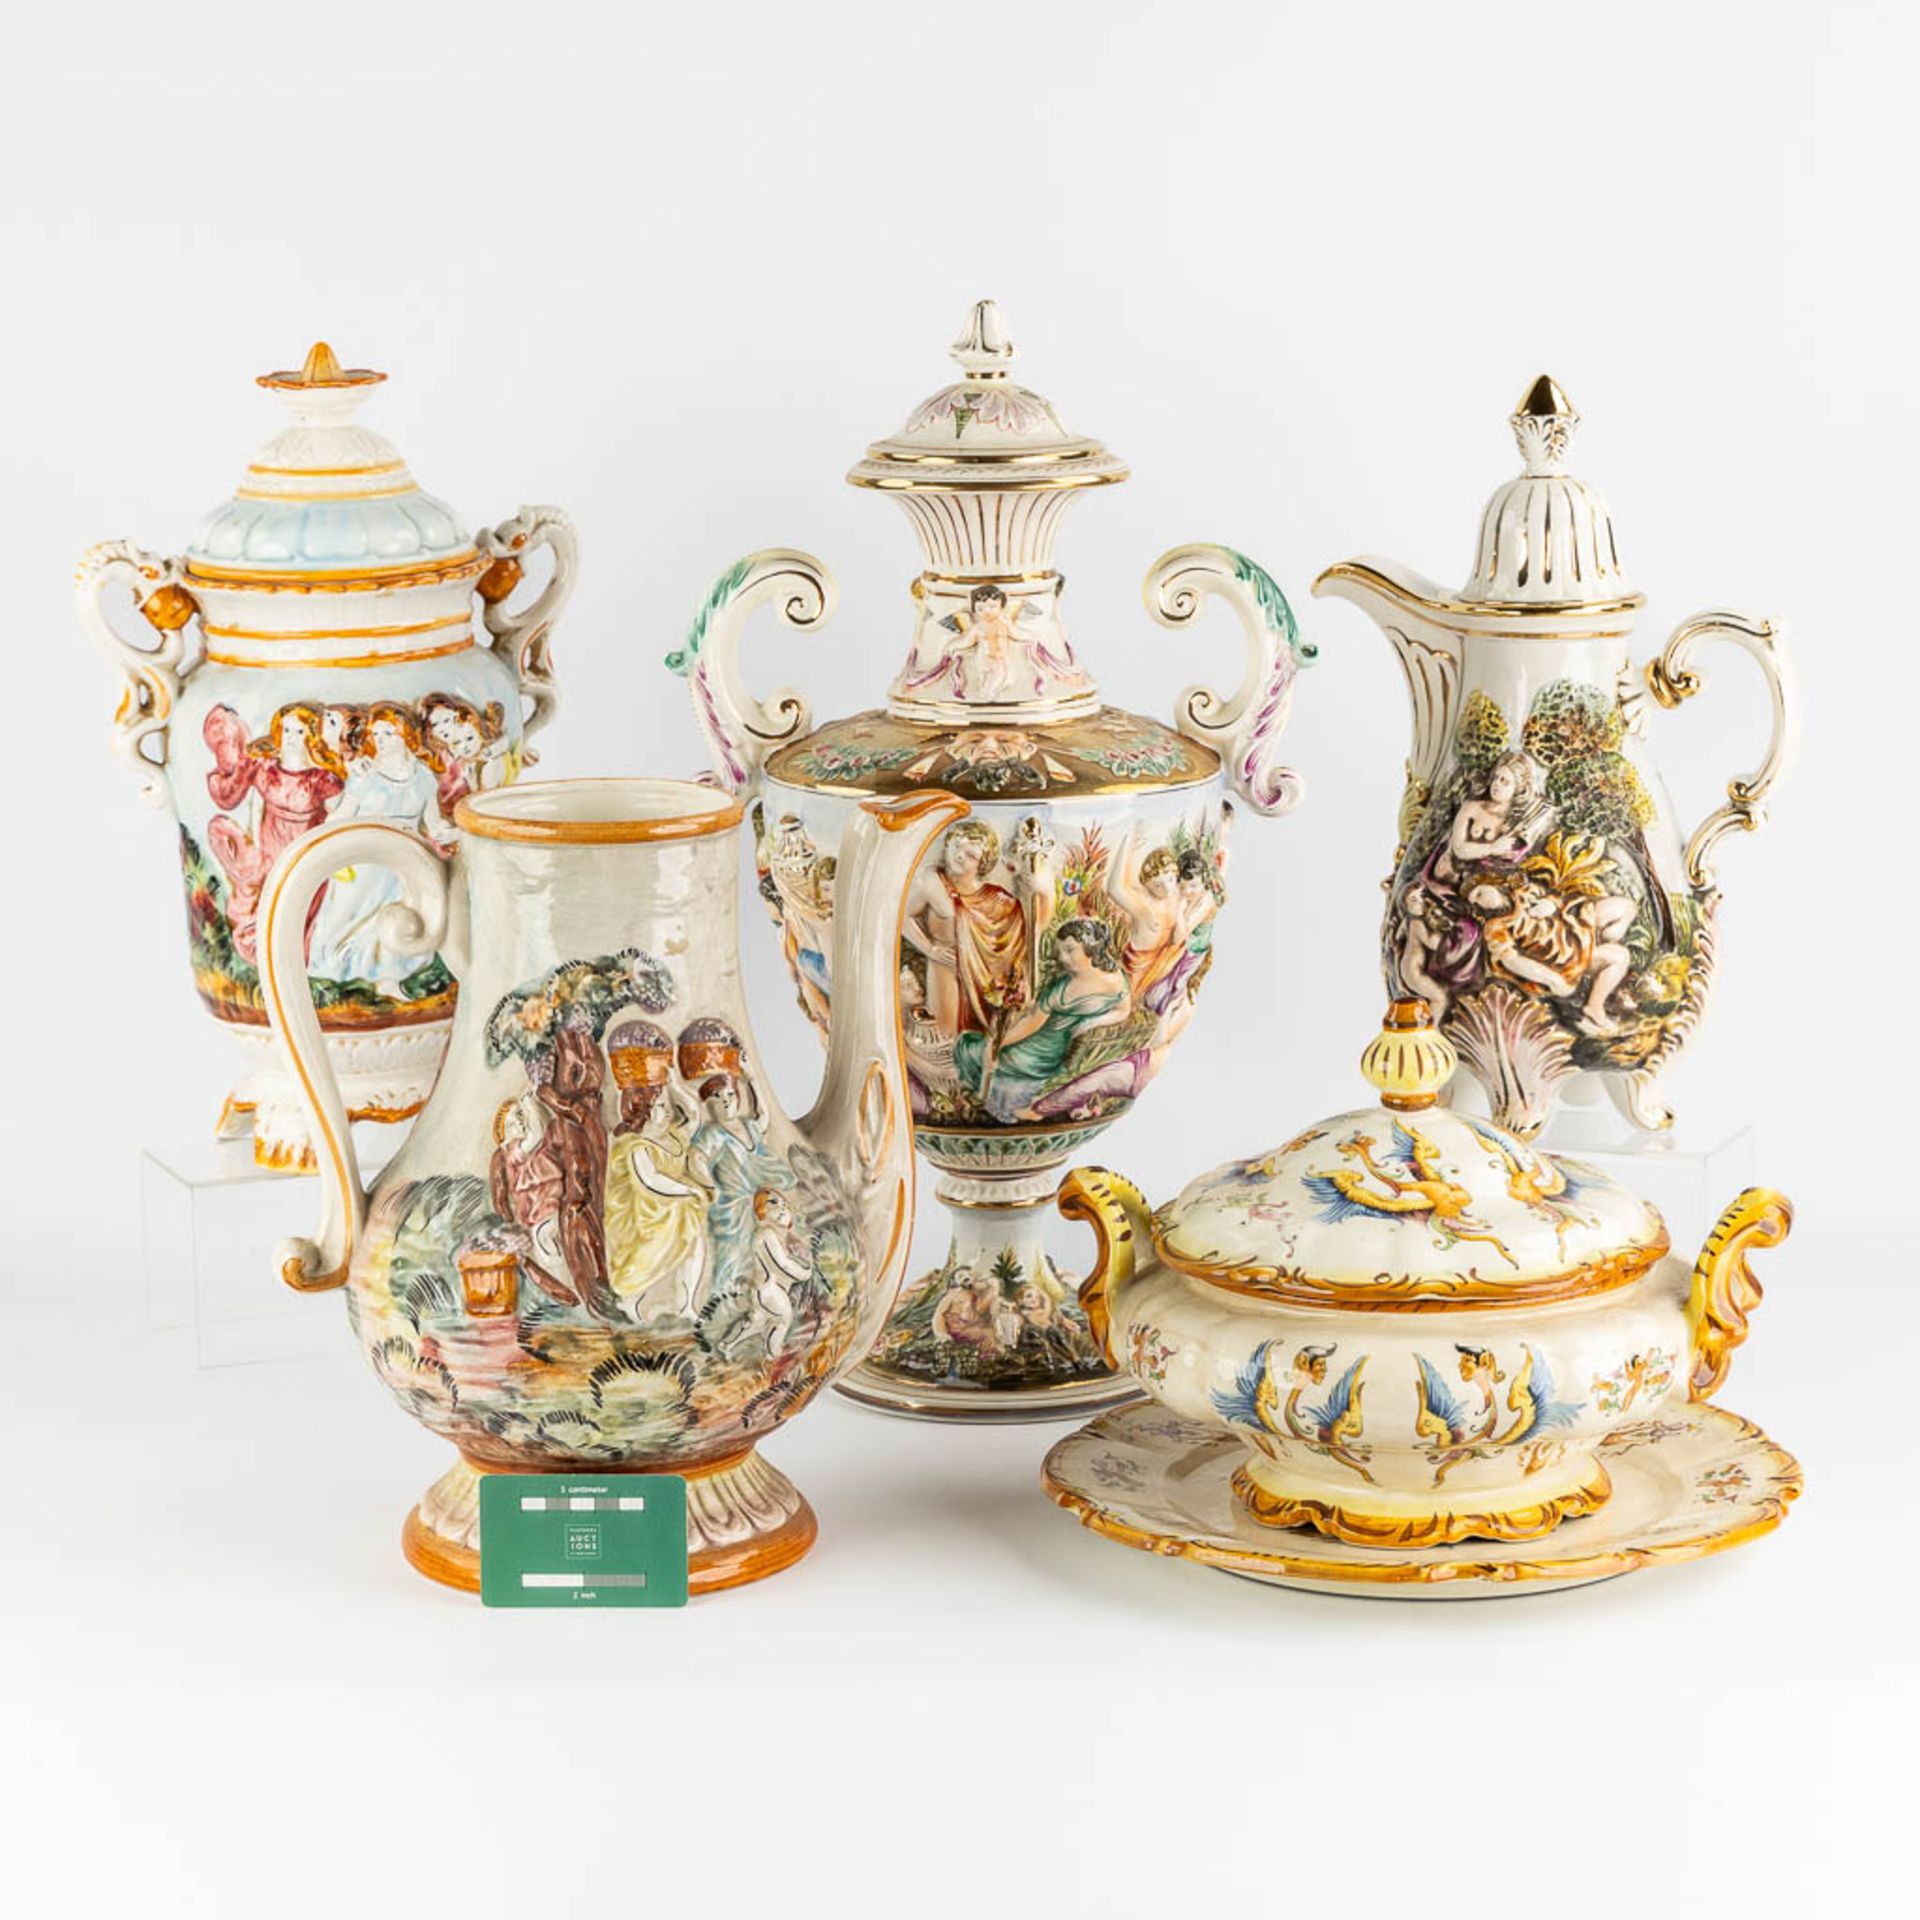 Capodimonte, 5 large pitchers, vases and urns. Glazed faience. (L:23 x W:31 x H:50 cm) - Image 2 of 31